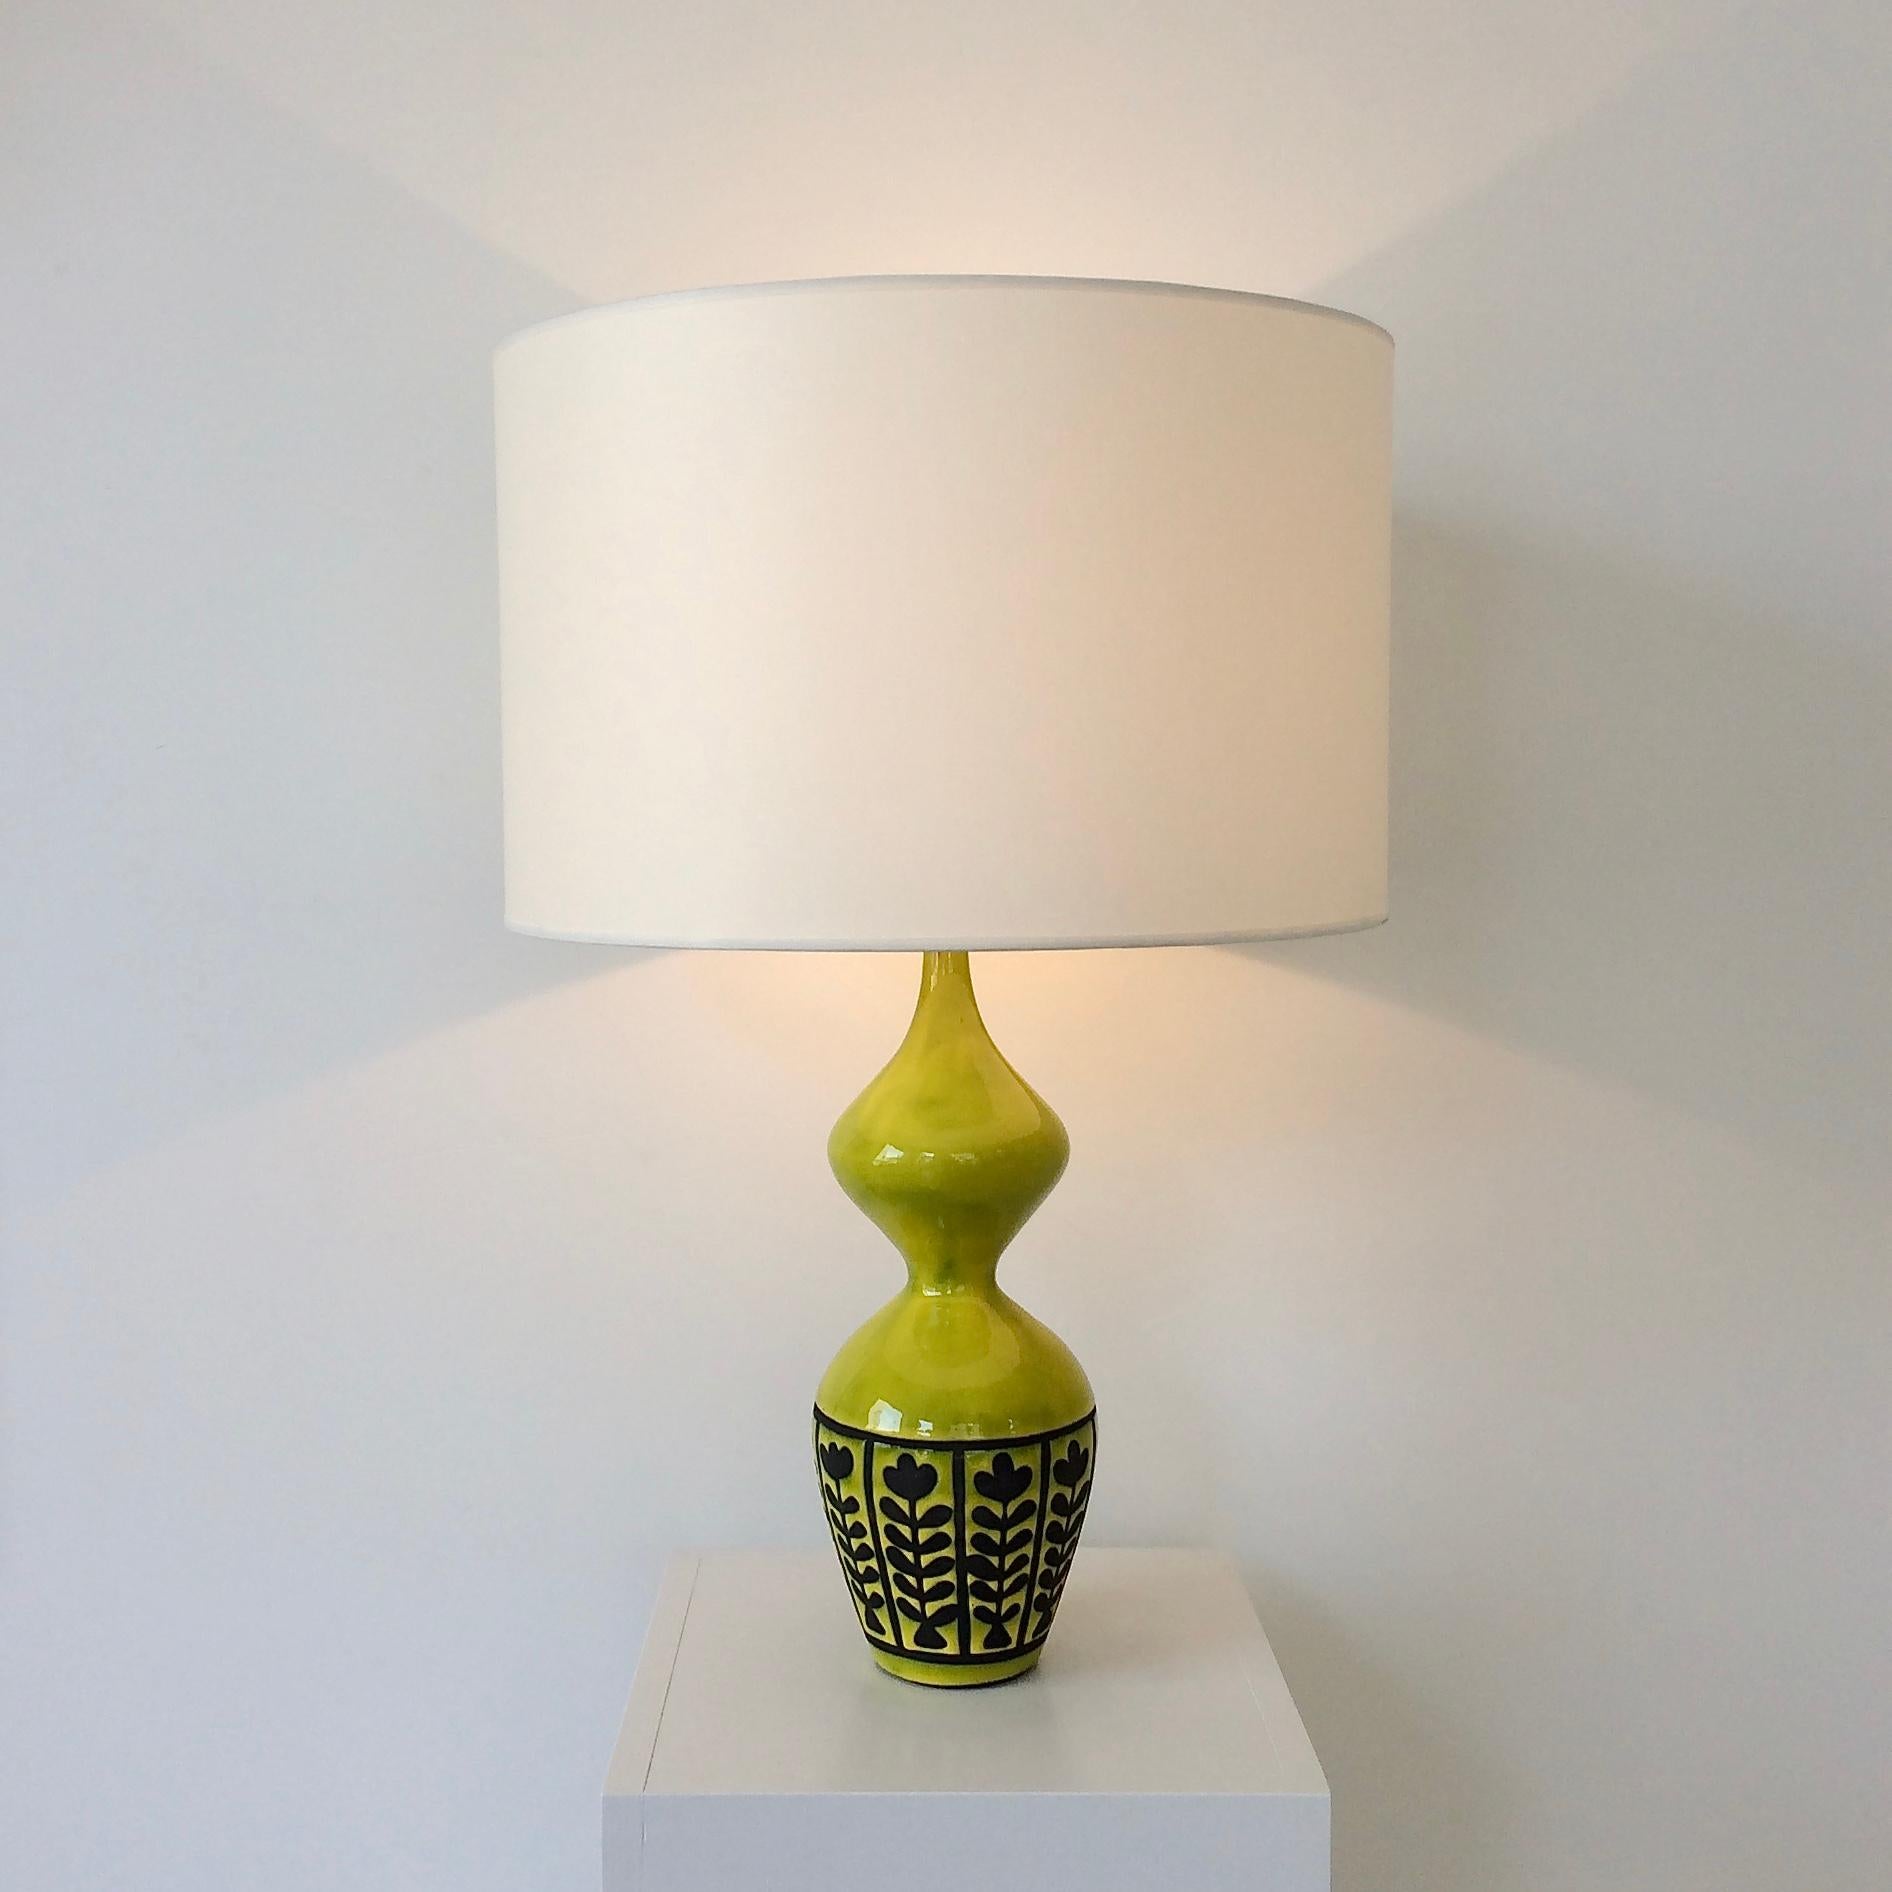 Nice Roger Capron table lamp, circa 1958, France.
Yellow enamelled earthenware with black flowers decor.
Signed underneath: Capron Vallauris S47.
Rewired. One E27 bulb of 60 W.
Dimensions: total height: 61 cm , height of the ceramic: 36 cm ,